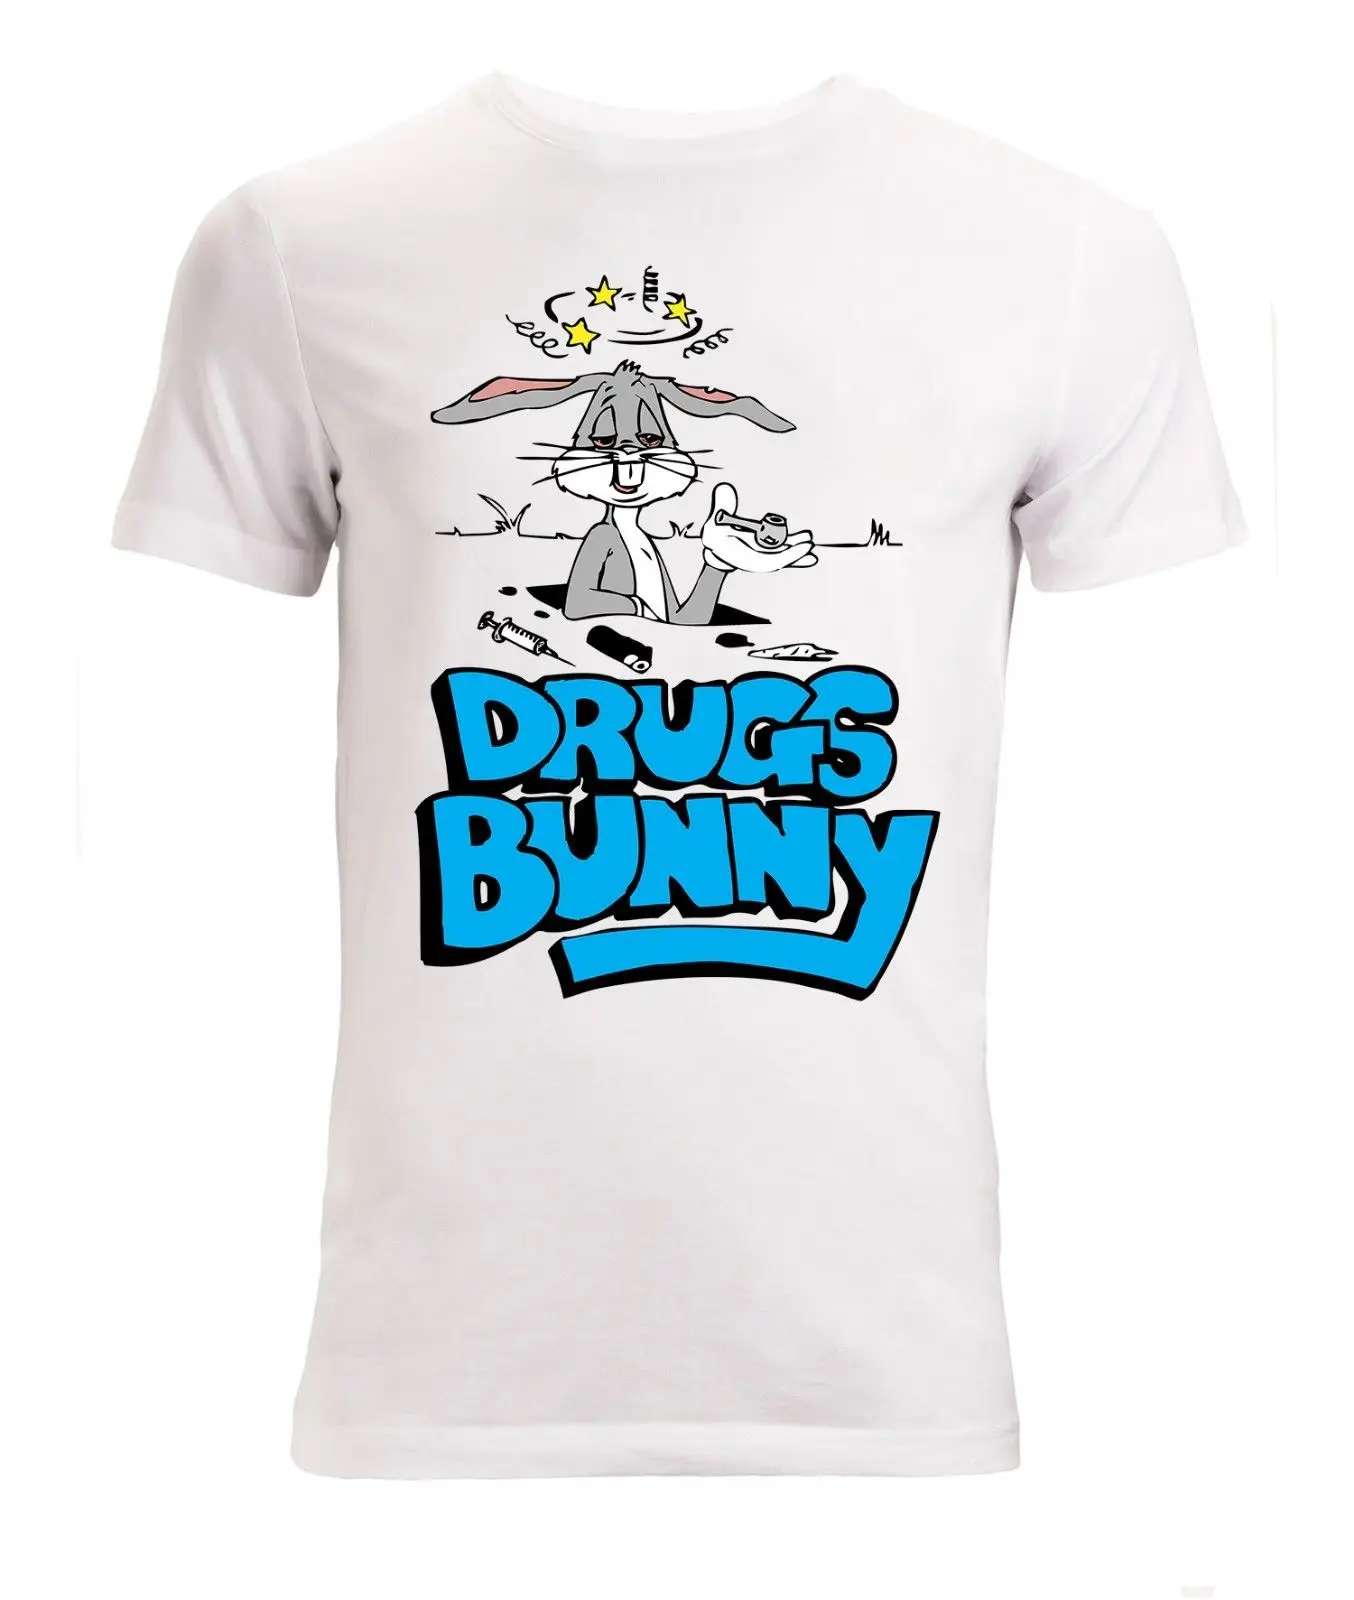 Drugs Bunny Funny Bugs Artwork men's (woman's available) t shirt white